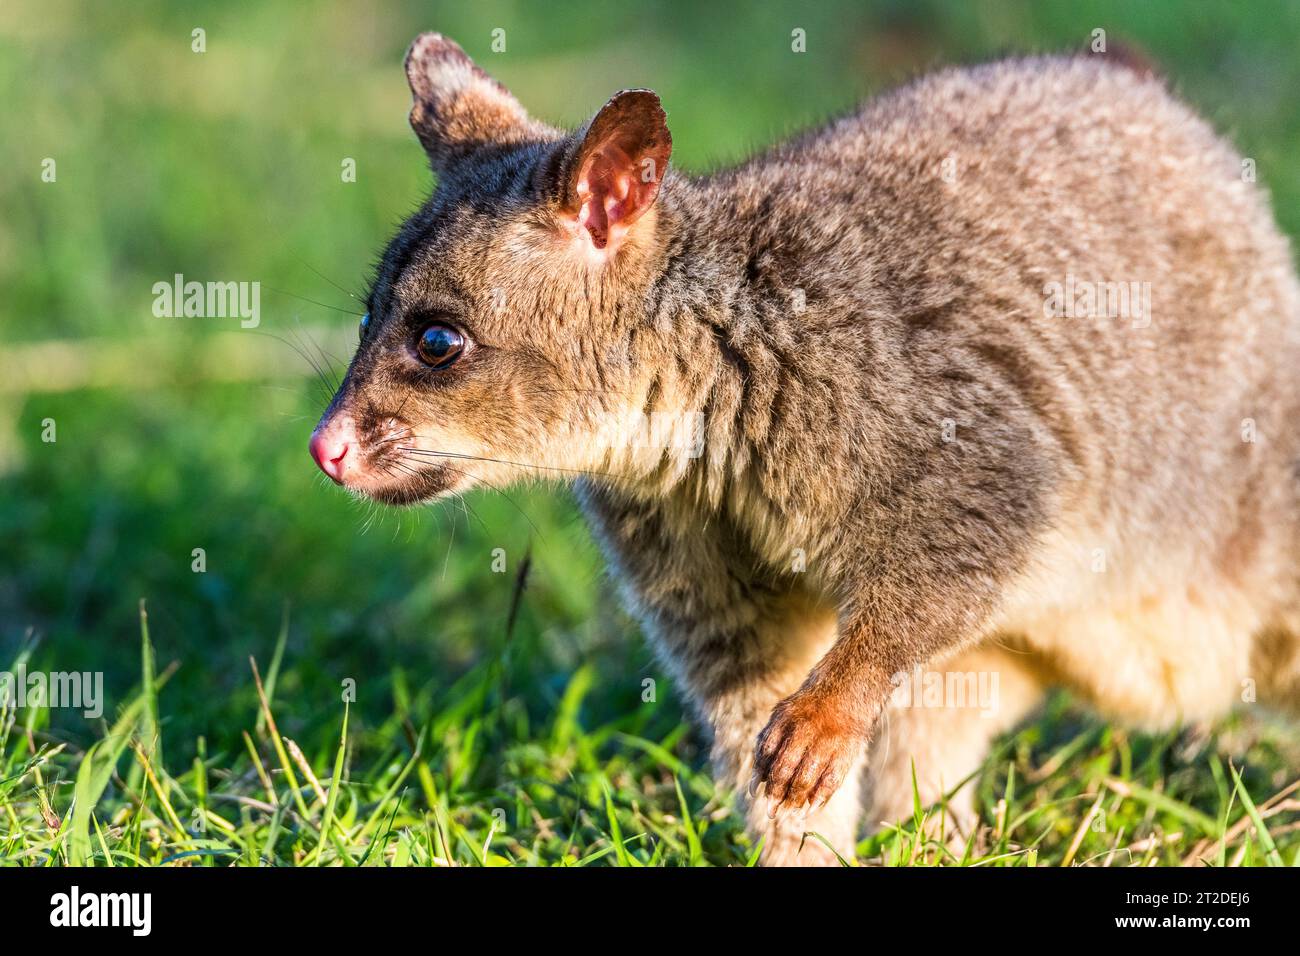 The common brushtail possum (Trichosurus vulpecula) is a nocturnal, semiarboreal marsupial of the family Phalangeridae, native to Australia. Stock Photo